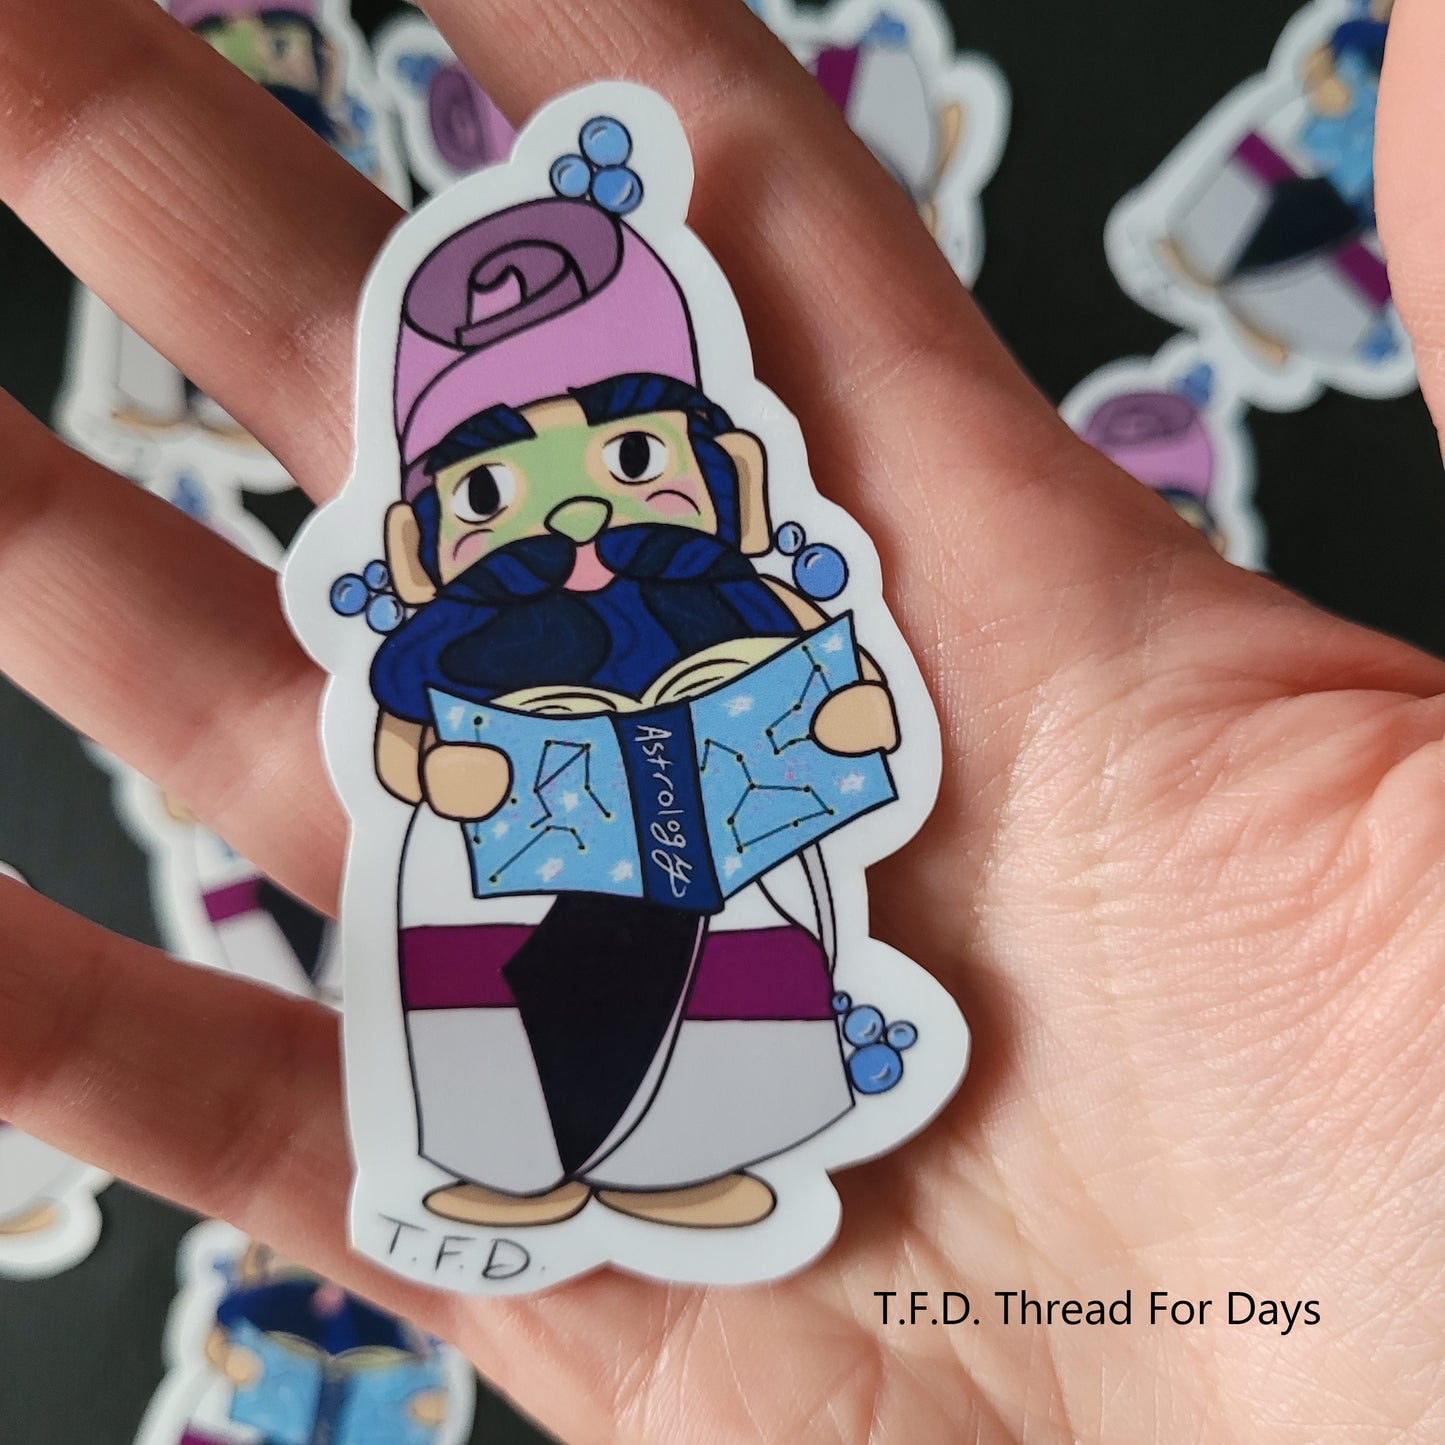 demisexual gnome sticker held in palm of hand for size reference